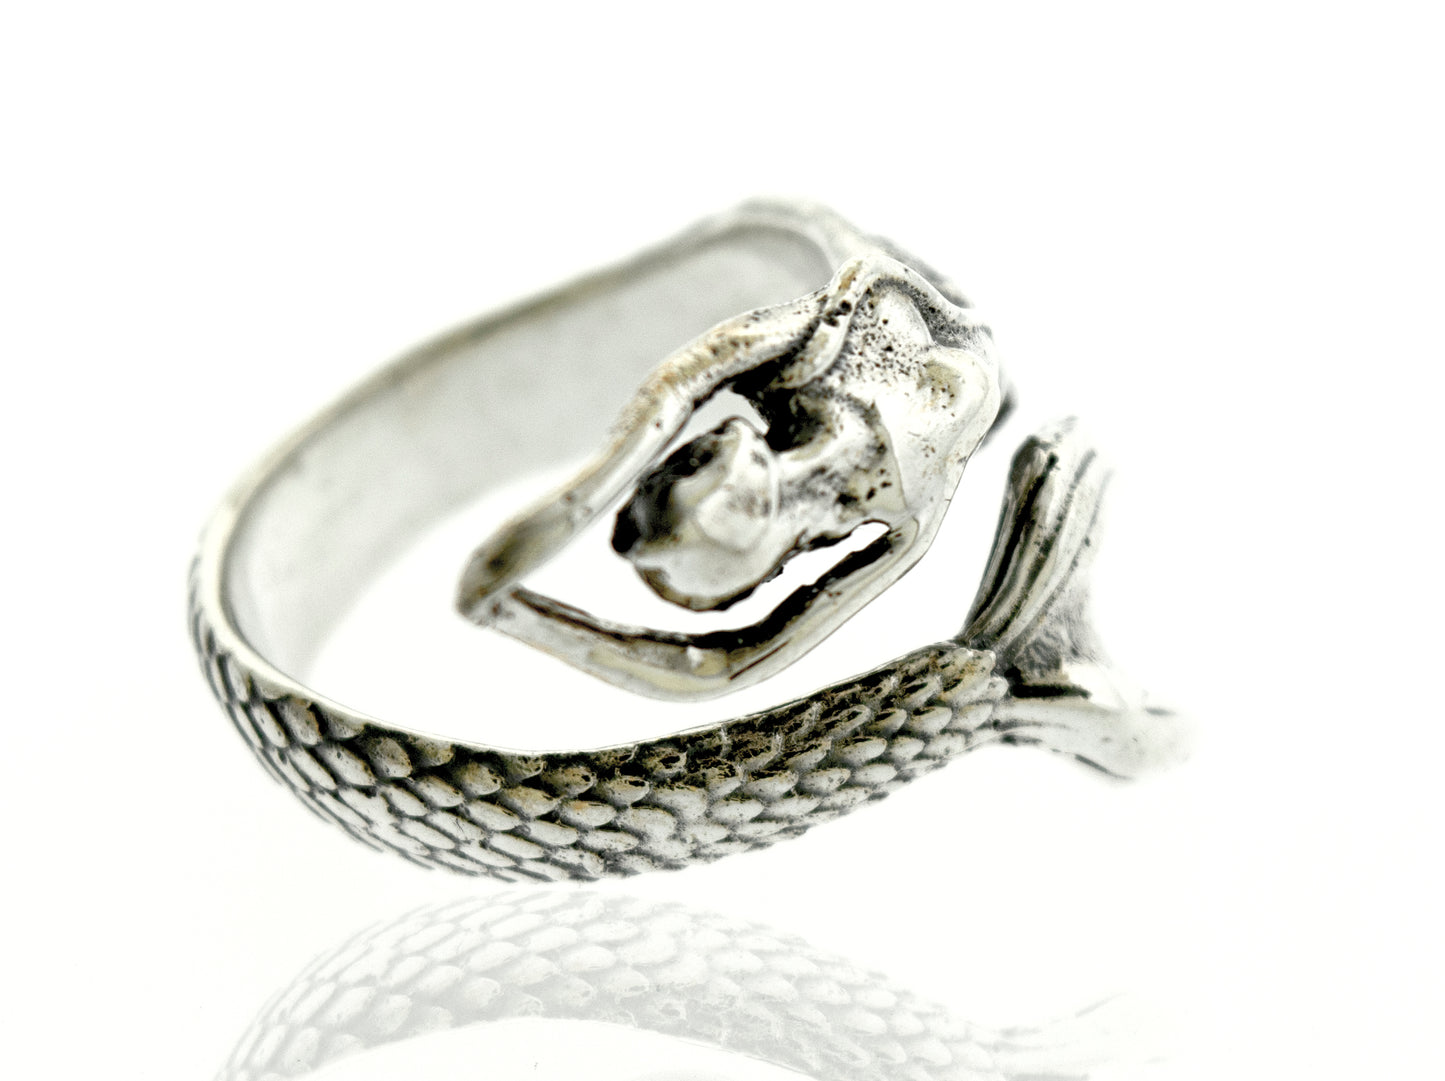 A Sterling Silver Adjustable Mermaid Ring with a stone accent, resting on a white surface.